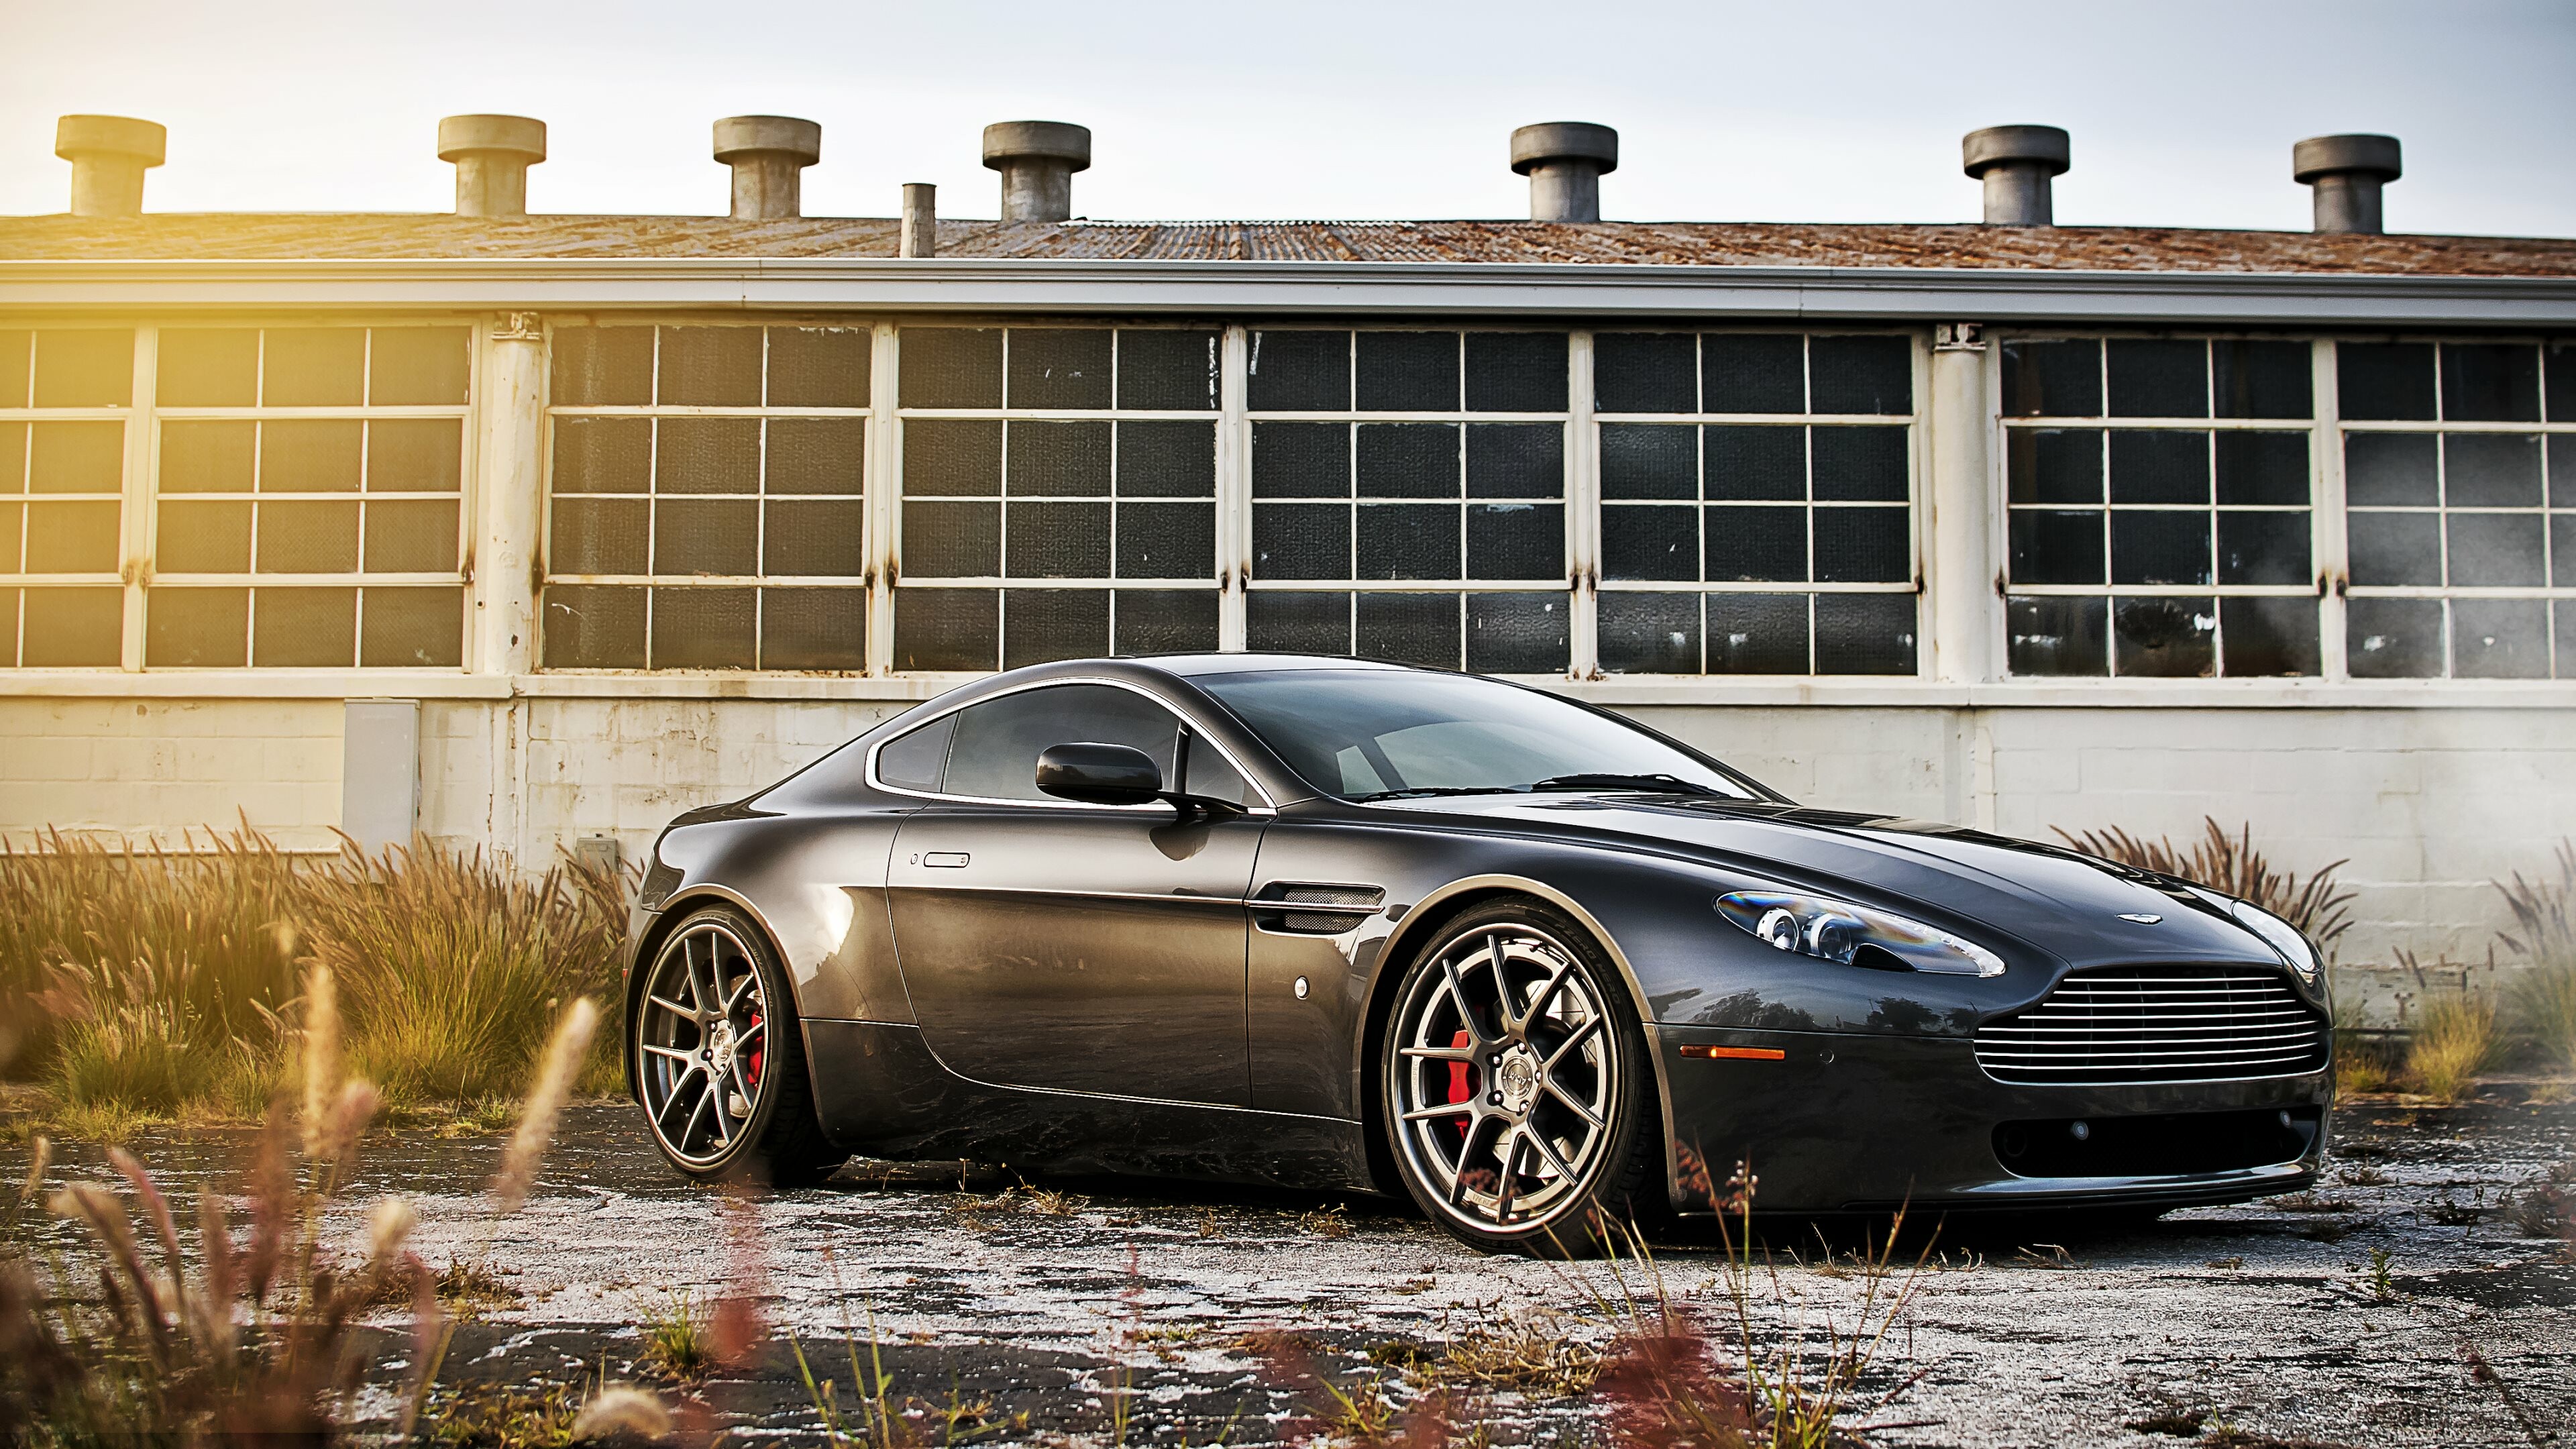 Aston Martin: British automaker, Gained fame as being 007's ride of choice. 3840x2160 4K Wallpaper.